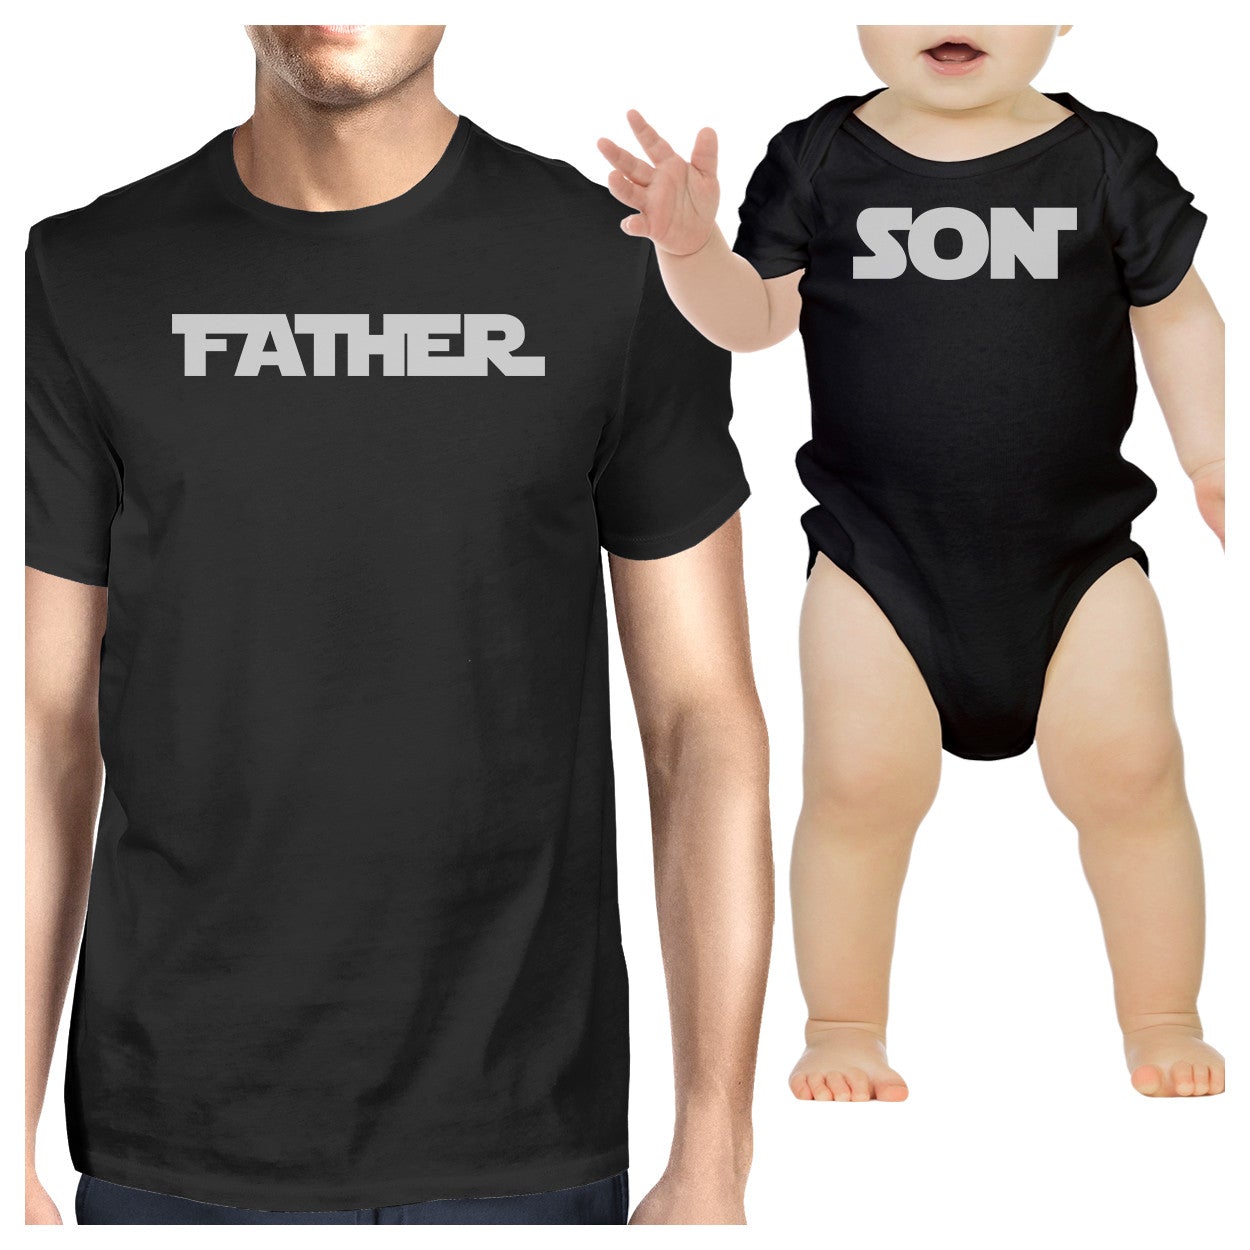 Father Son Star Battle Theme Dad and Baby Matching Black Shirts